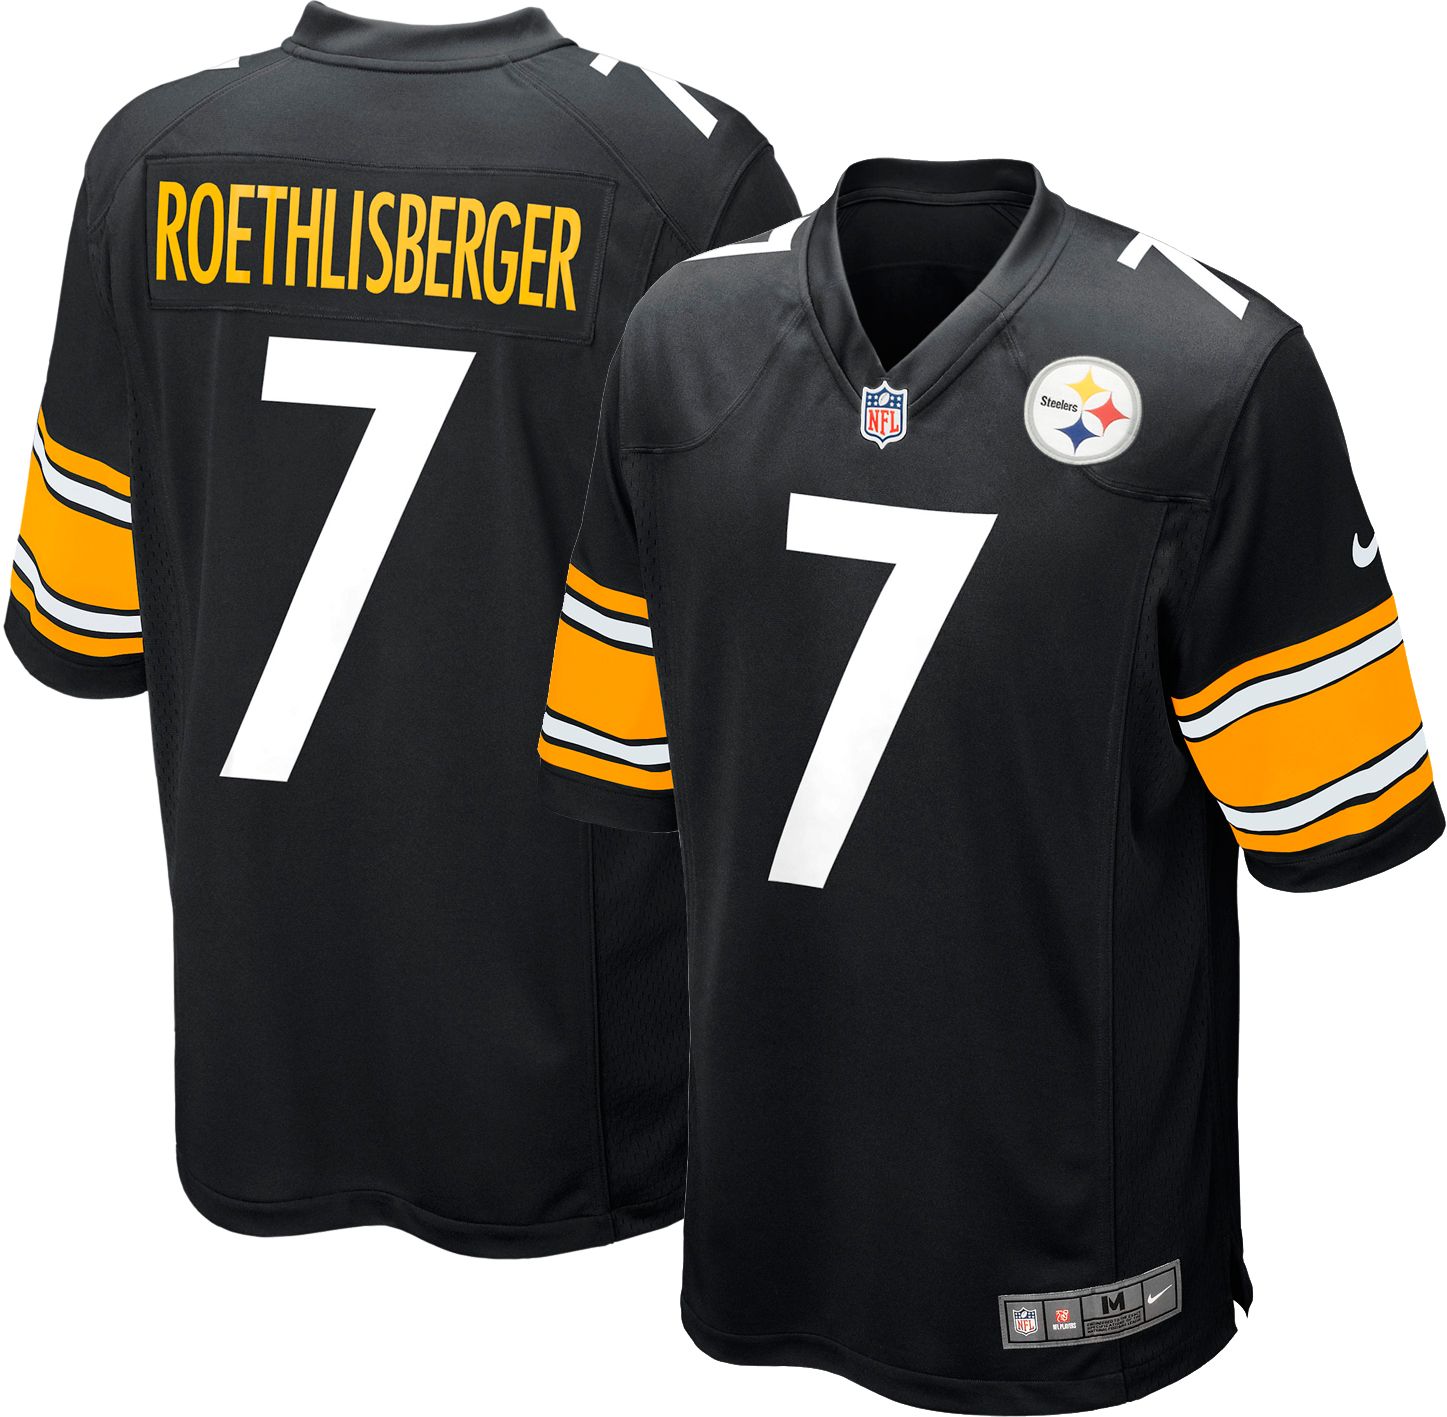 bumble bee steelers jersey